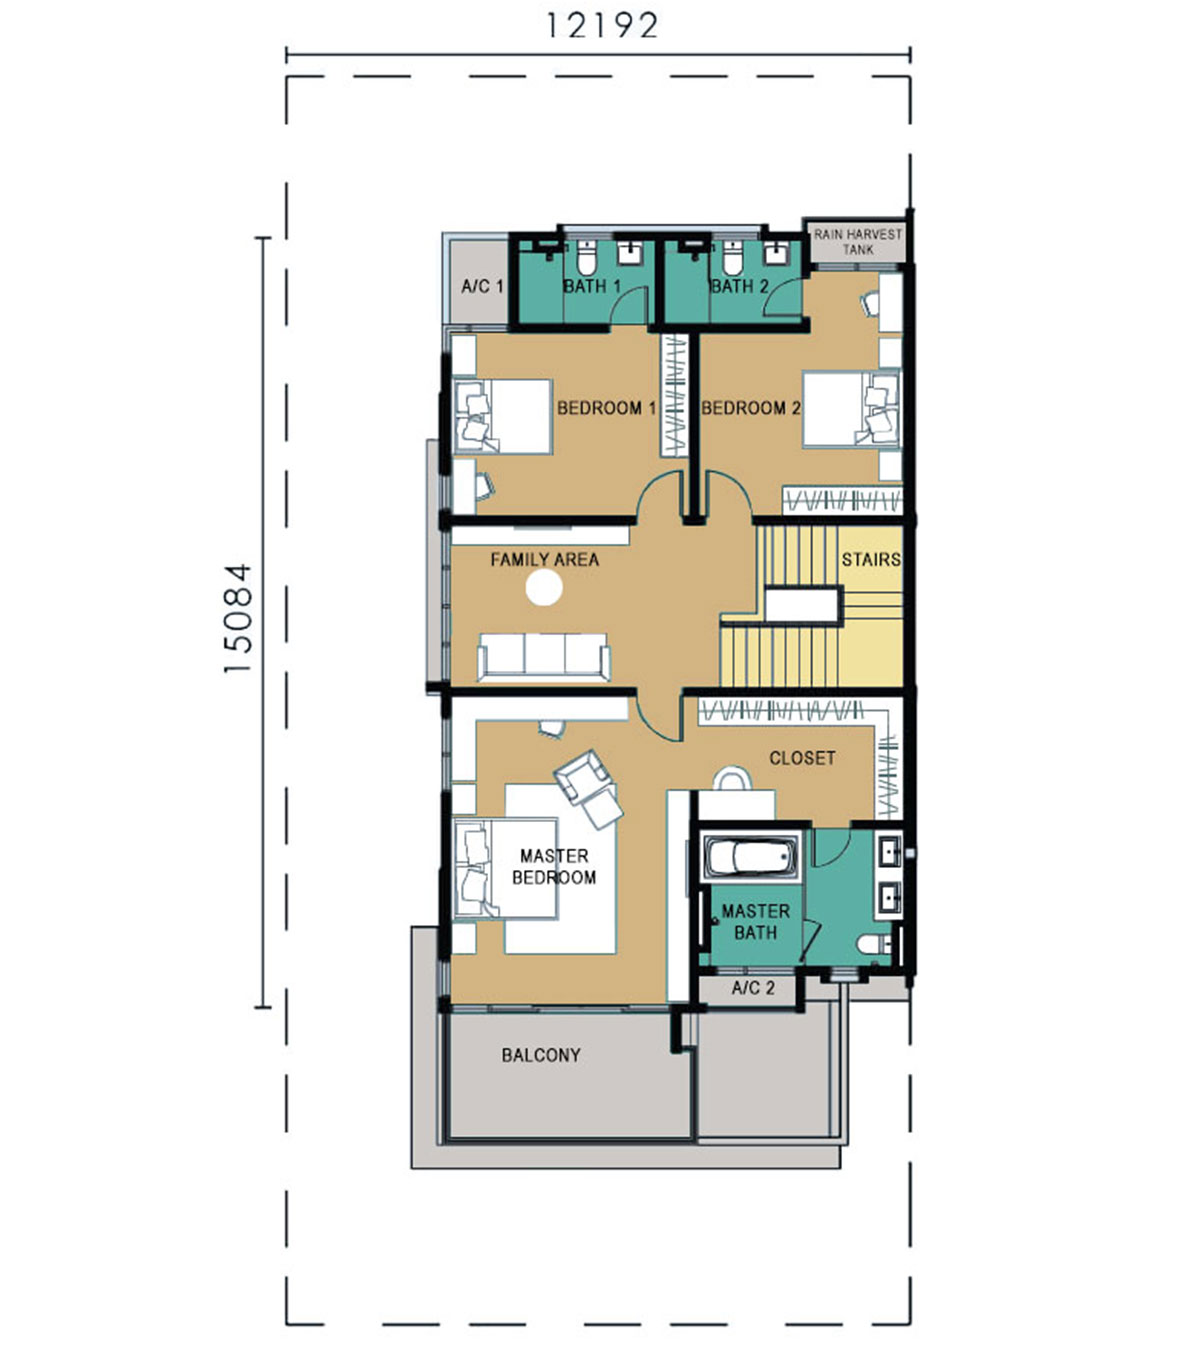 2-Storey Semi-Detached - Type A - First Floor